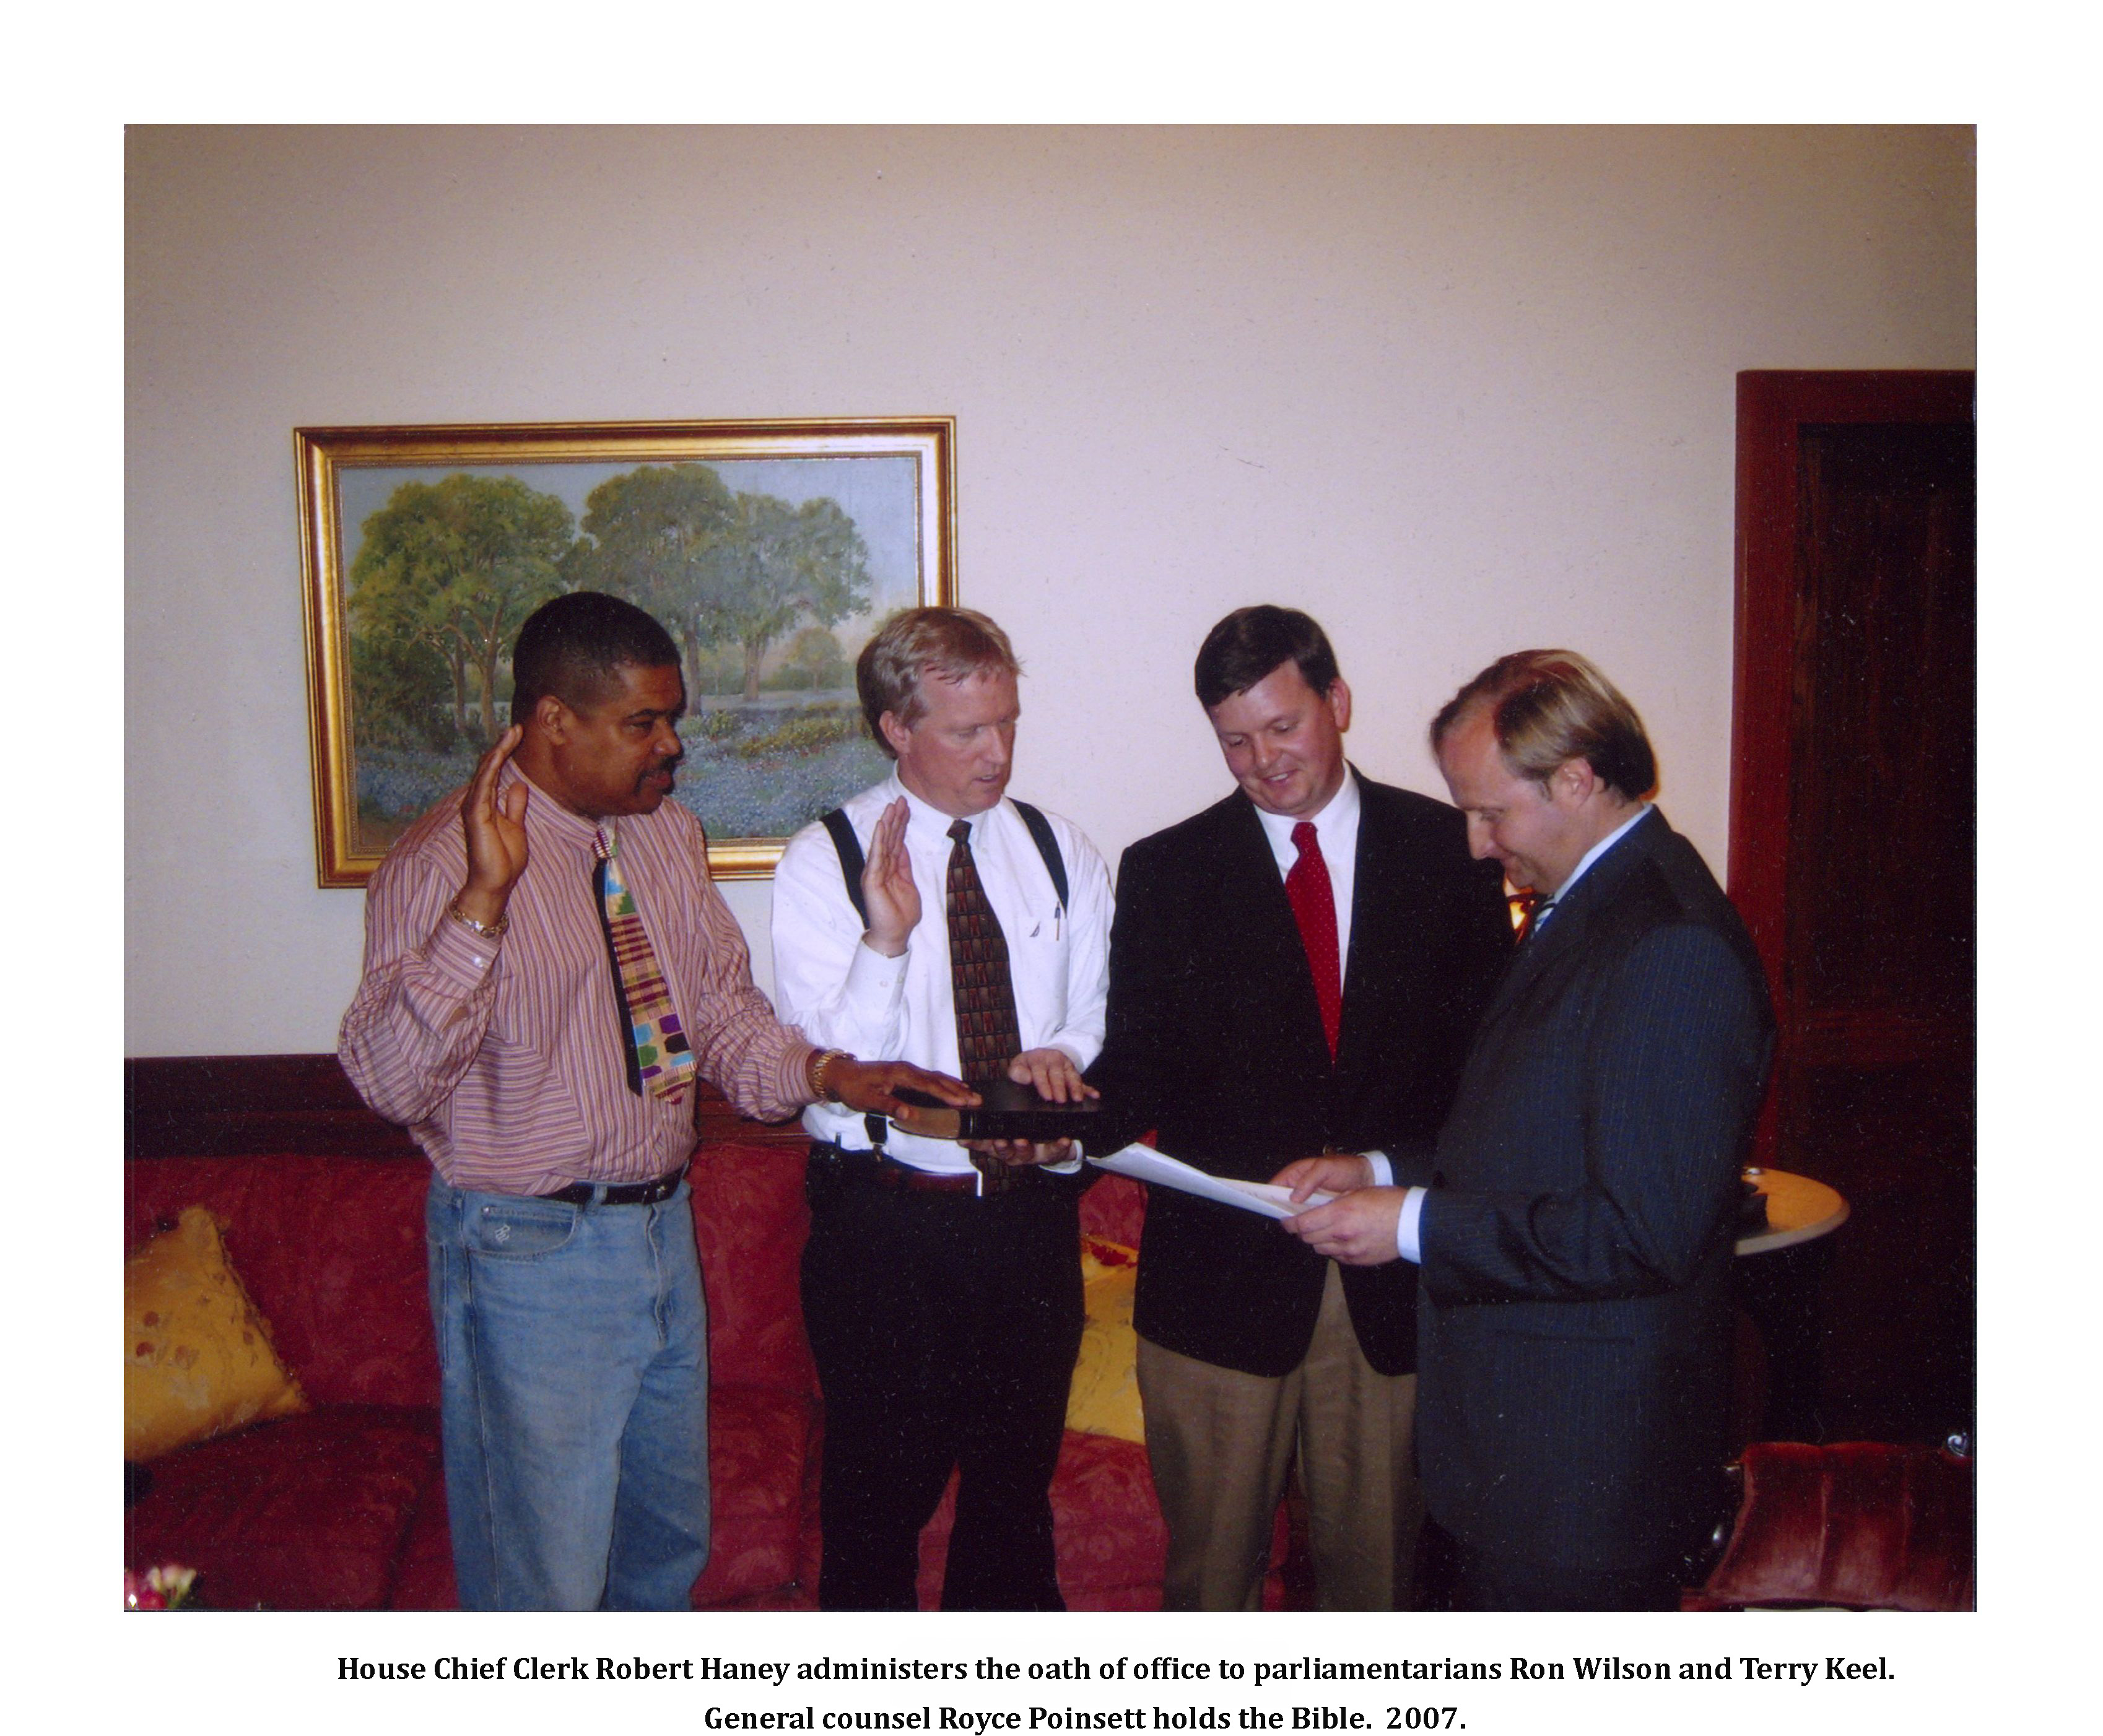 House chief clerk Robert Haney administers the oath of office to parliamentarians Ron Wilson and Terry Keel. General counsel Royce Poinsett holds the Bible. 2007. Photo courtesy of Terry Keel